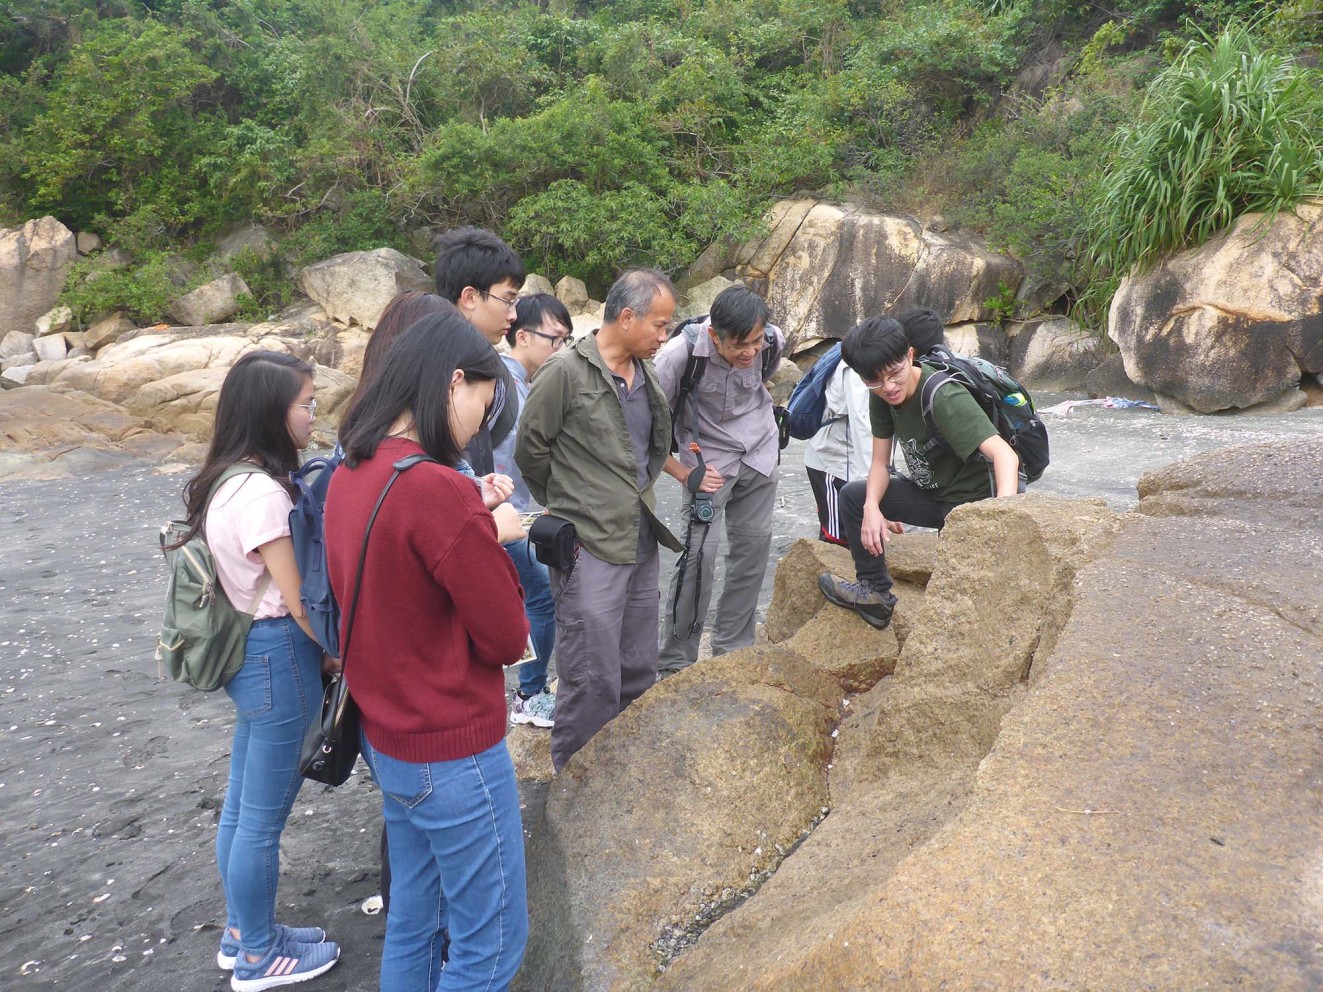 Natural excursions give rise to conservation awareness among the public.